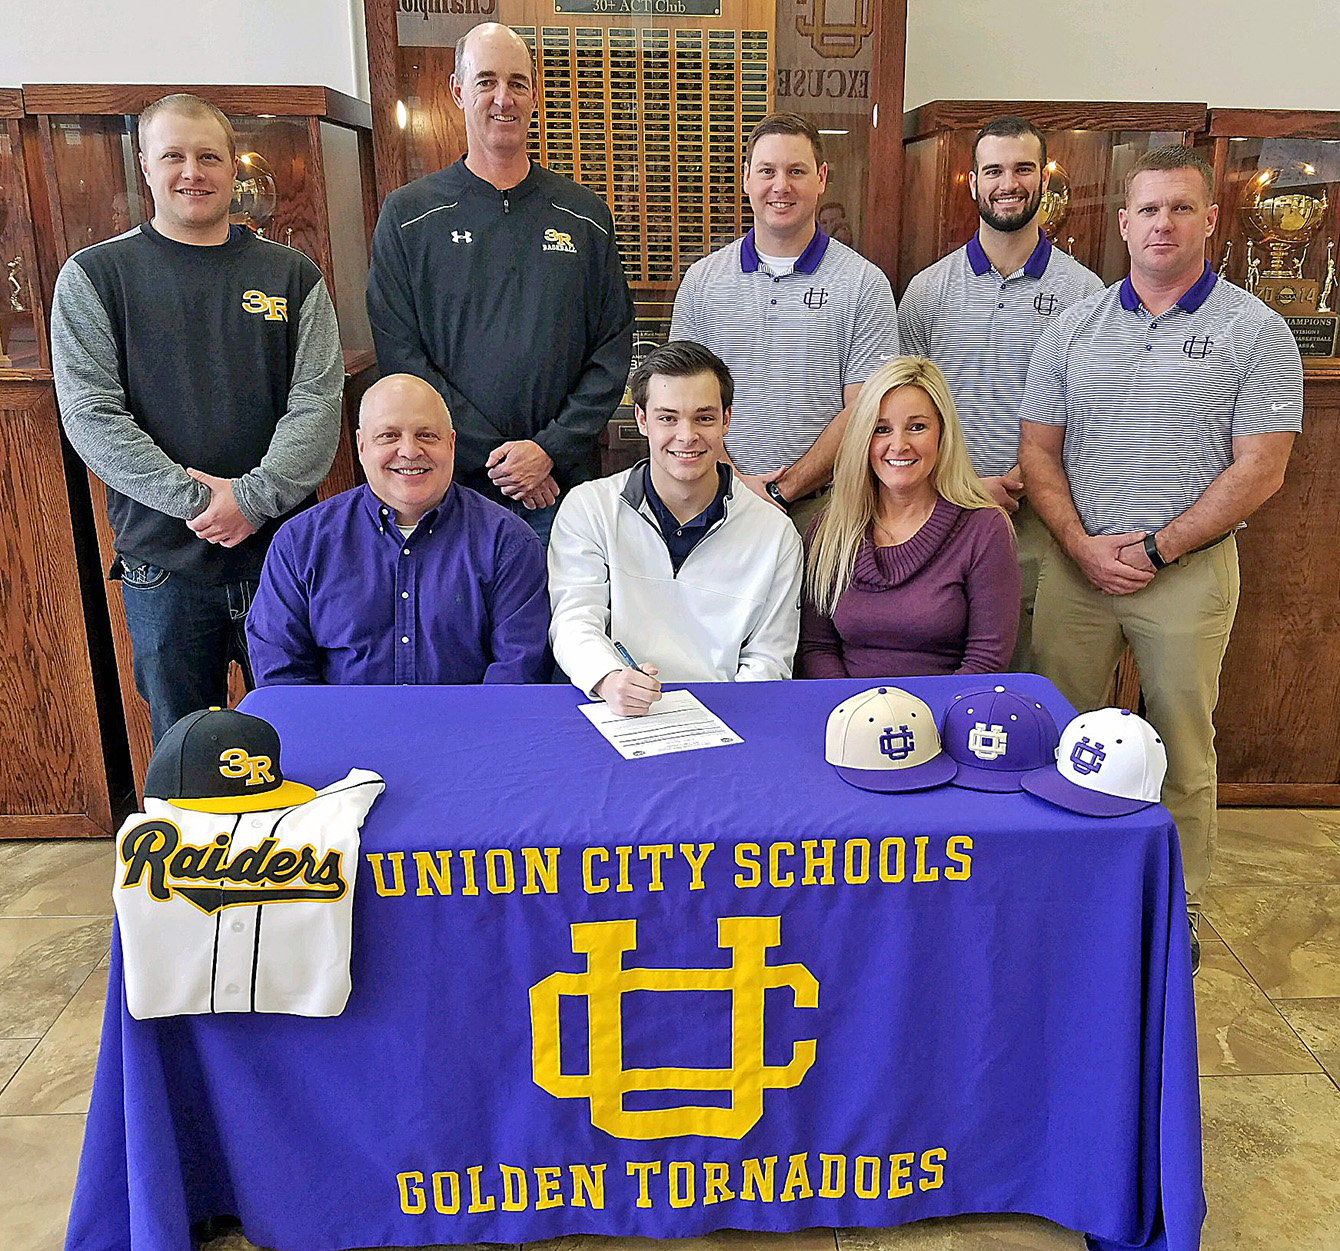 Jared Woodward of Union City HS, Union City, TN signs with Raiders